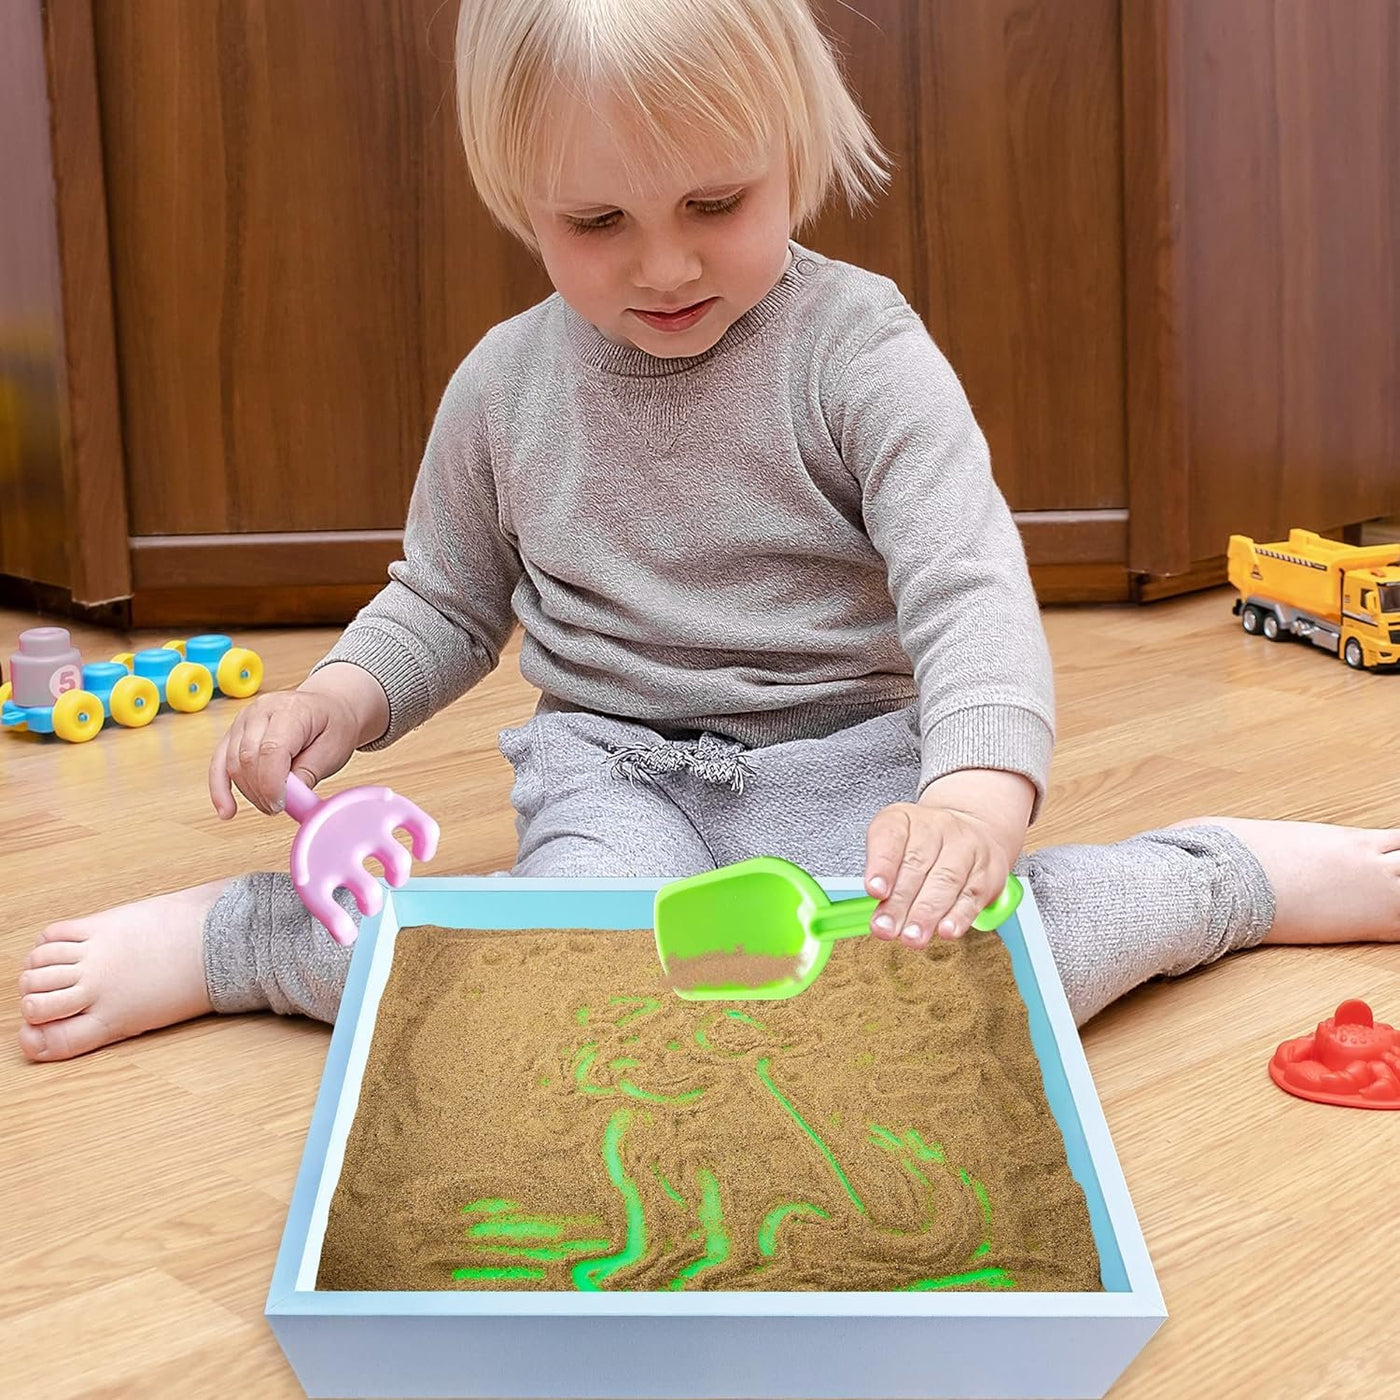 Wood Sand Painting Light Box for Kids, Table LED Sandbox with 3 Light Up Modes and Sand Toys, Art Sand Animation, Relaxing Sensory Play, Exploration, Motor Skills & Learning